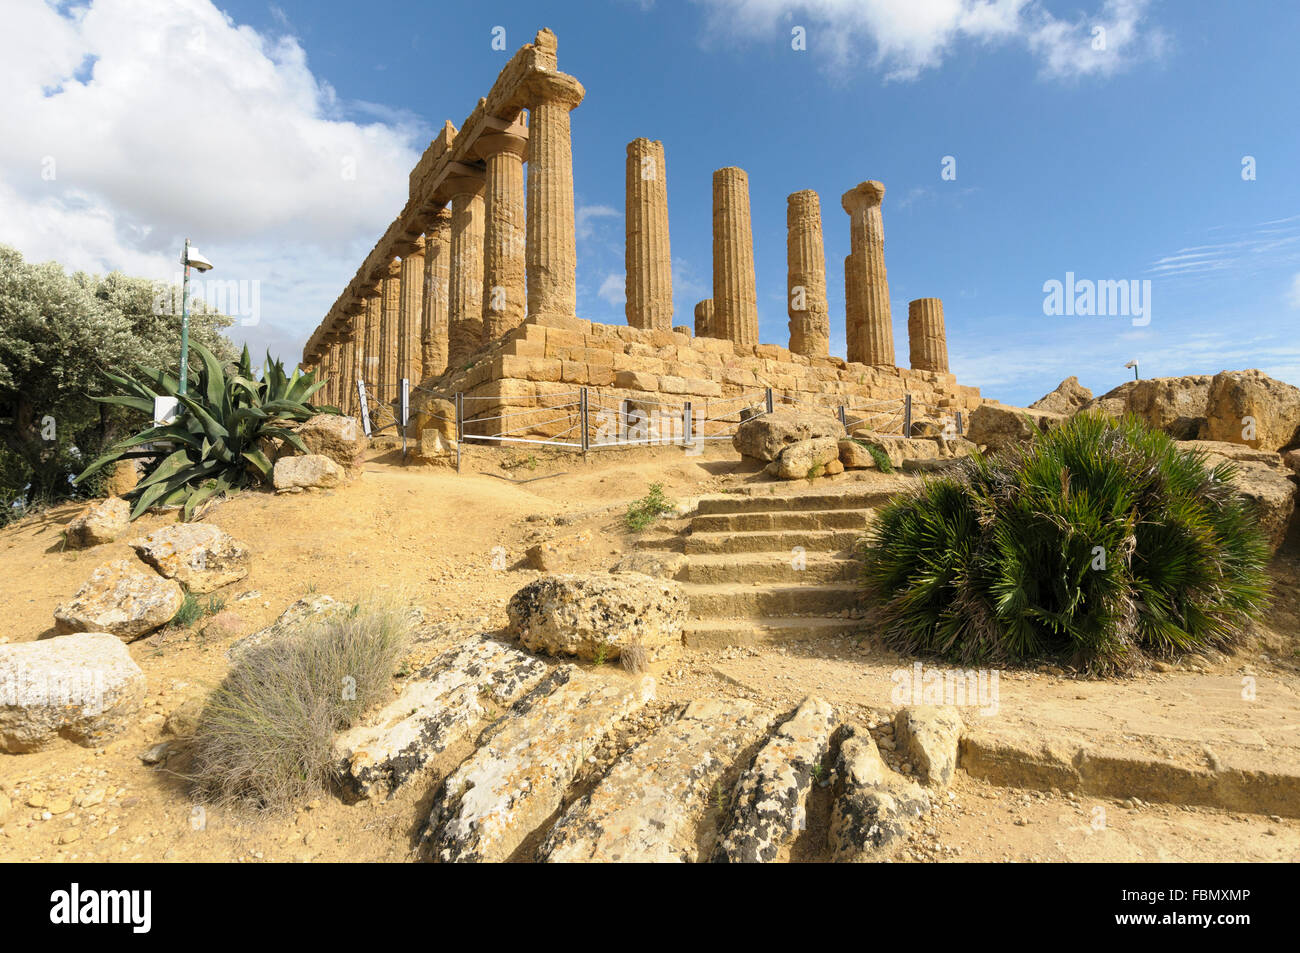 The Temple of Juno, Valley of Temples, Agrigento, Sicily, Italy. Stock Photo